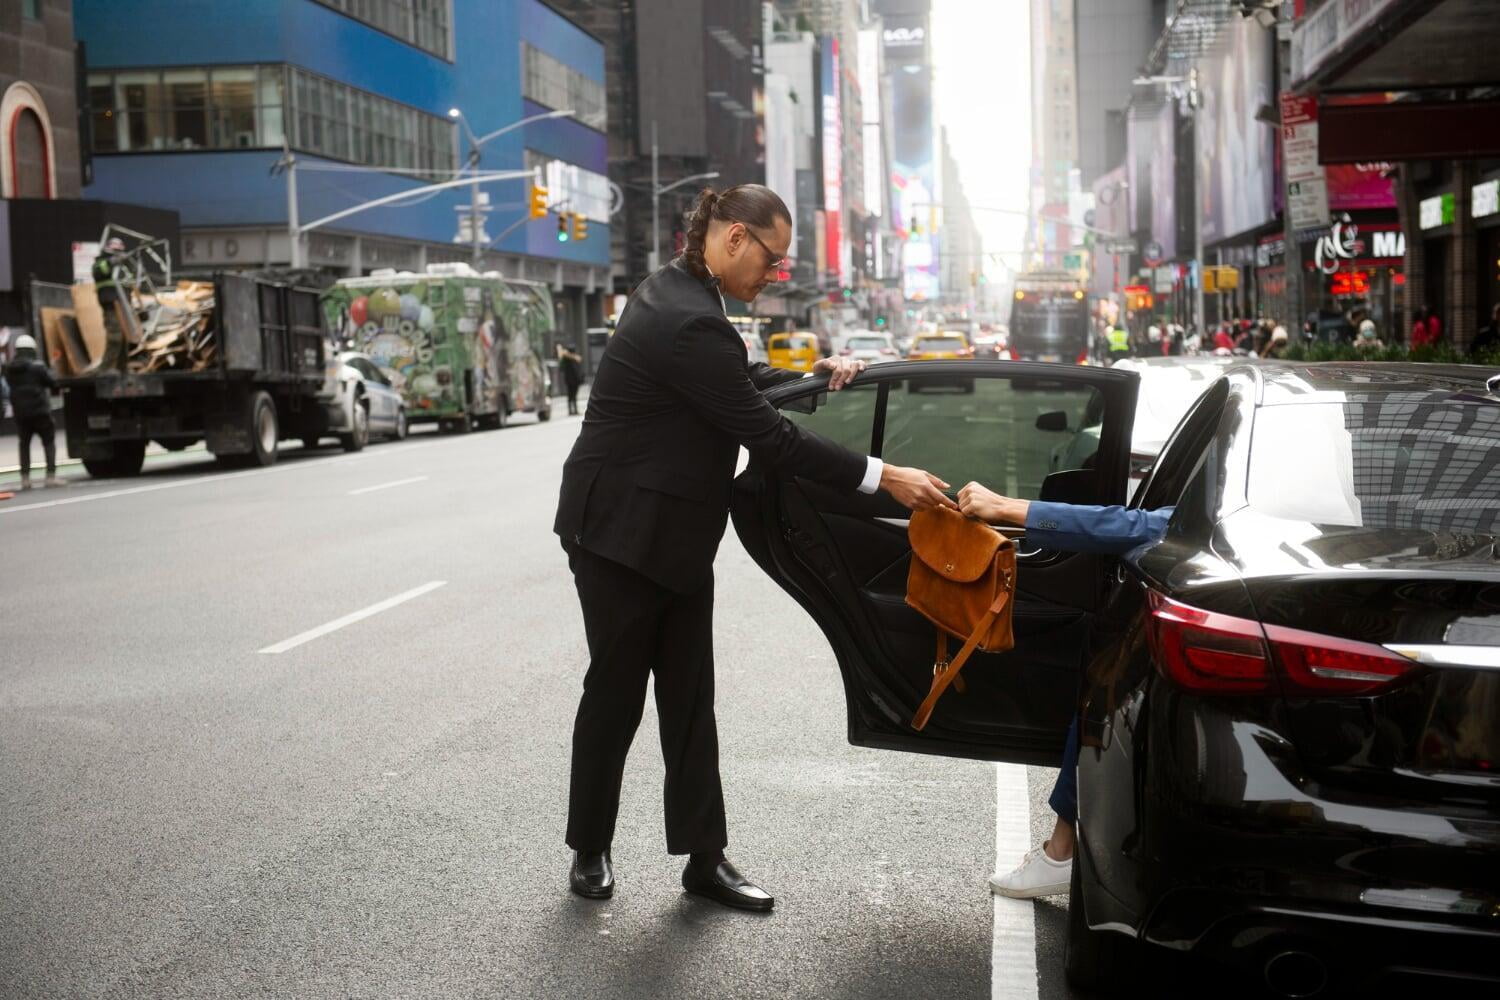 Why Executive Airport Chauffeur Service Could Be the Key to Stress-Free Travel